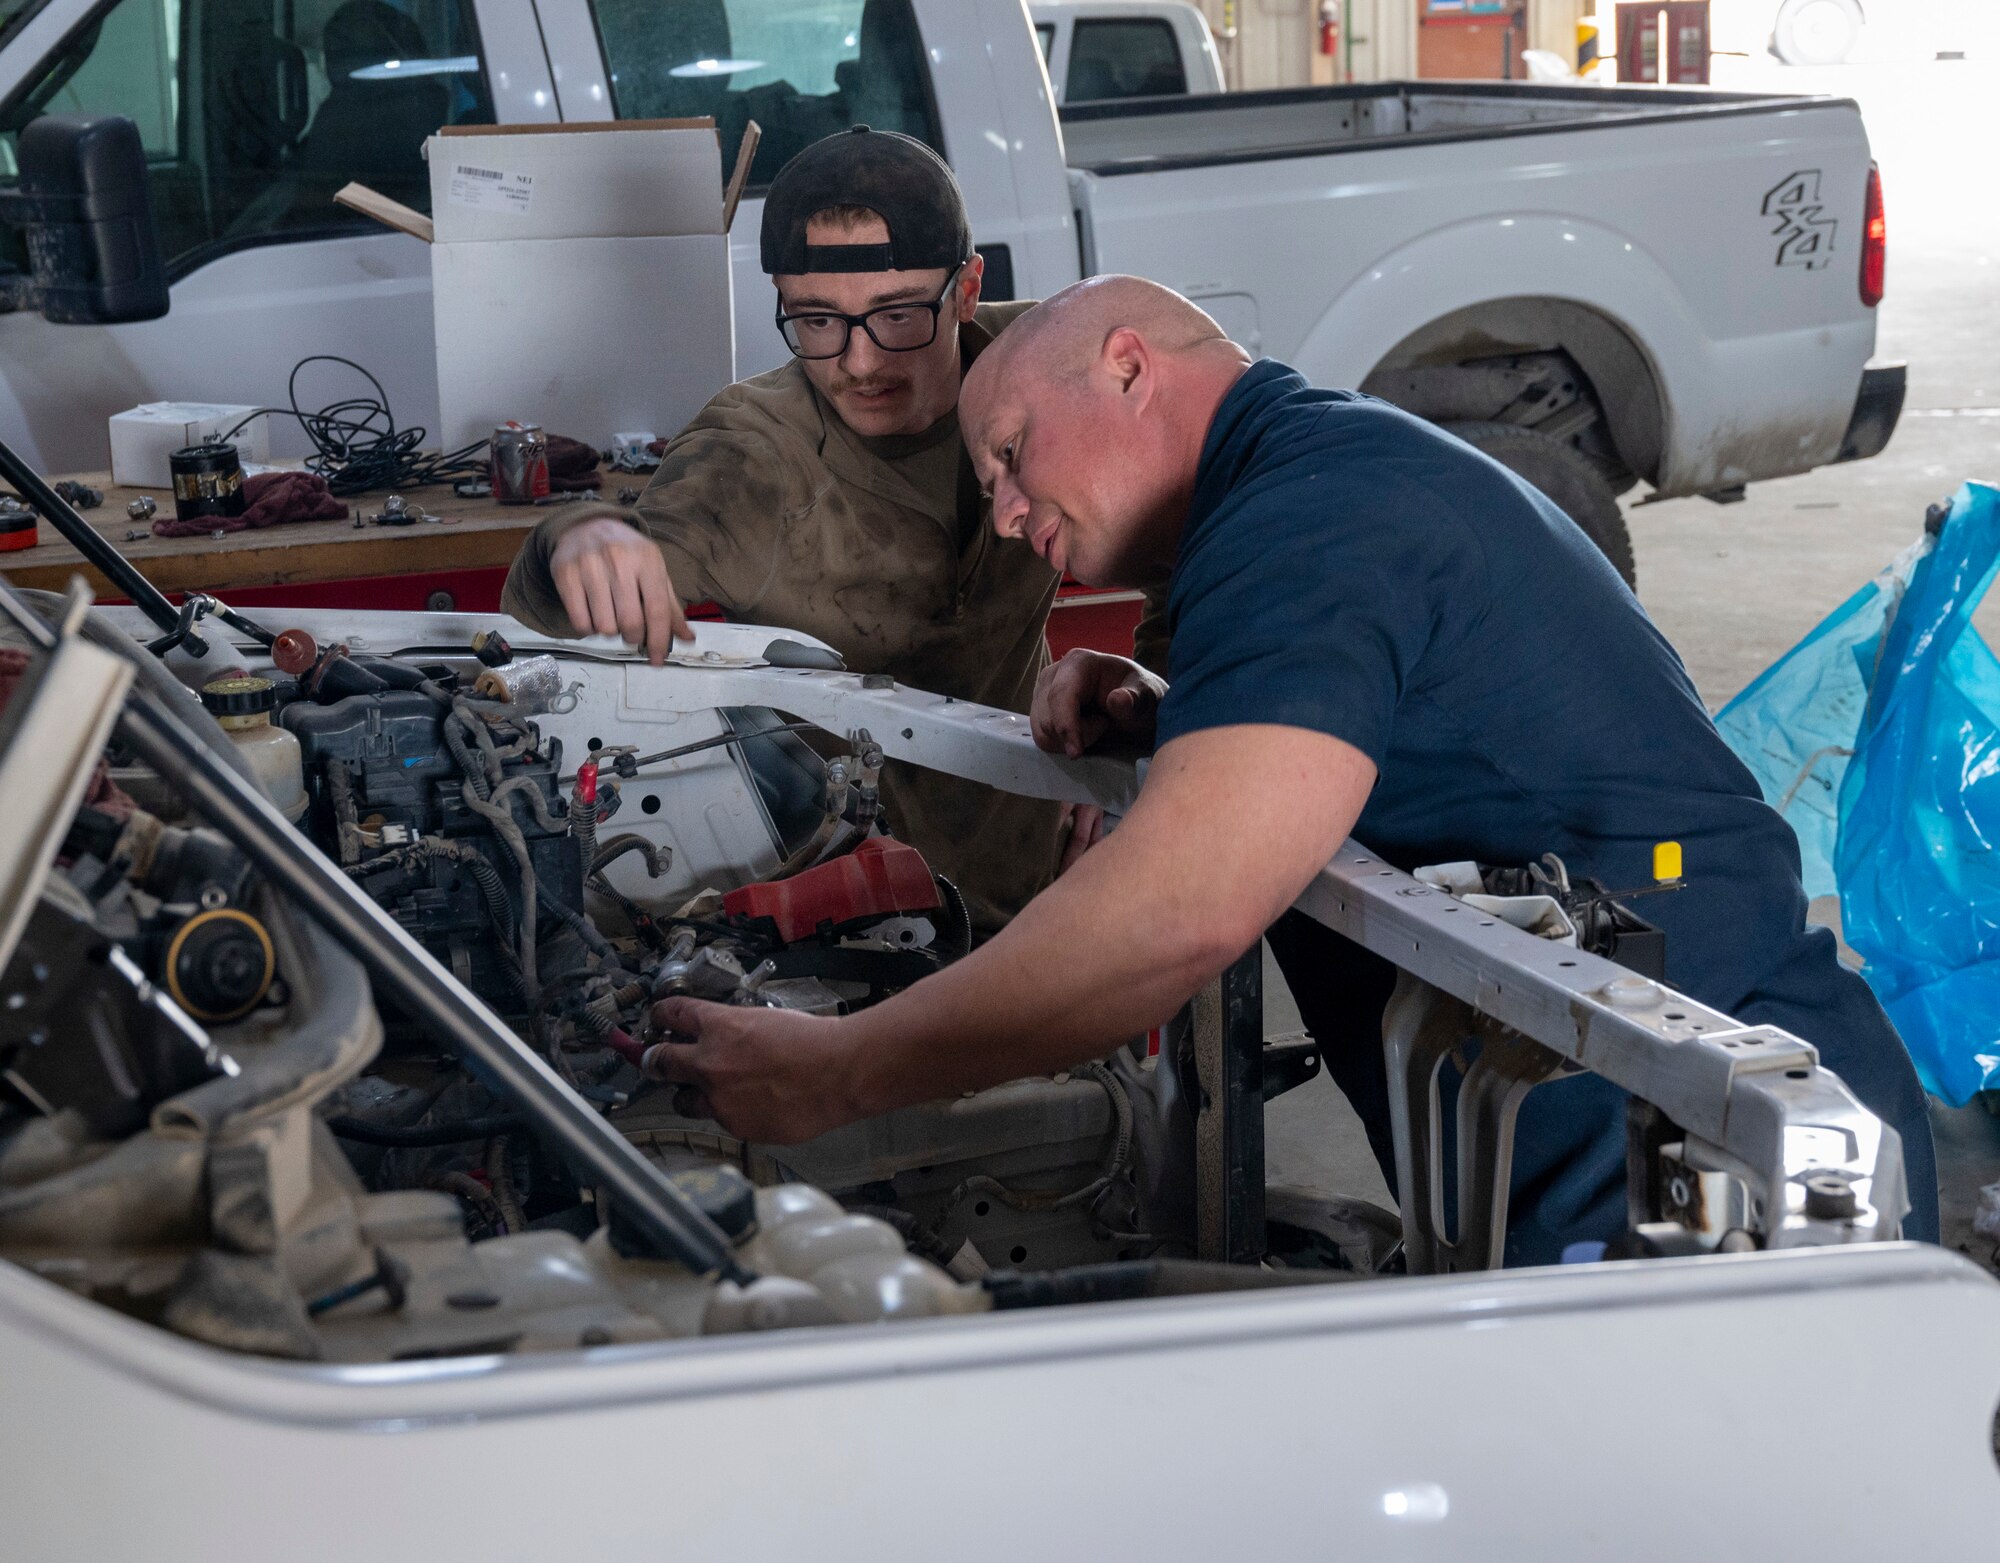 U.S. Air Force Airman 1st Class William Glendenning, Left, and U.S. Air Force Tech Sgt. Jeffery Burch, Right, 386th Expeditionary Logistics Readiness Squadron vehicle management specialists, inspect an engine bay at Ali Al Salem Air Base, Kuwait, March 8, 2023.